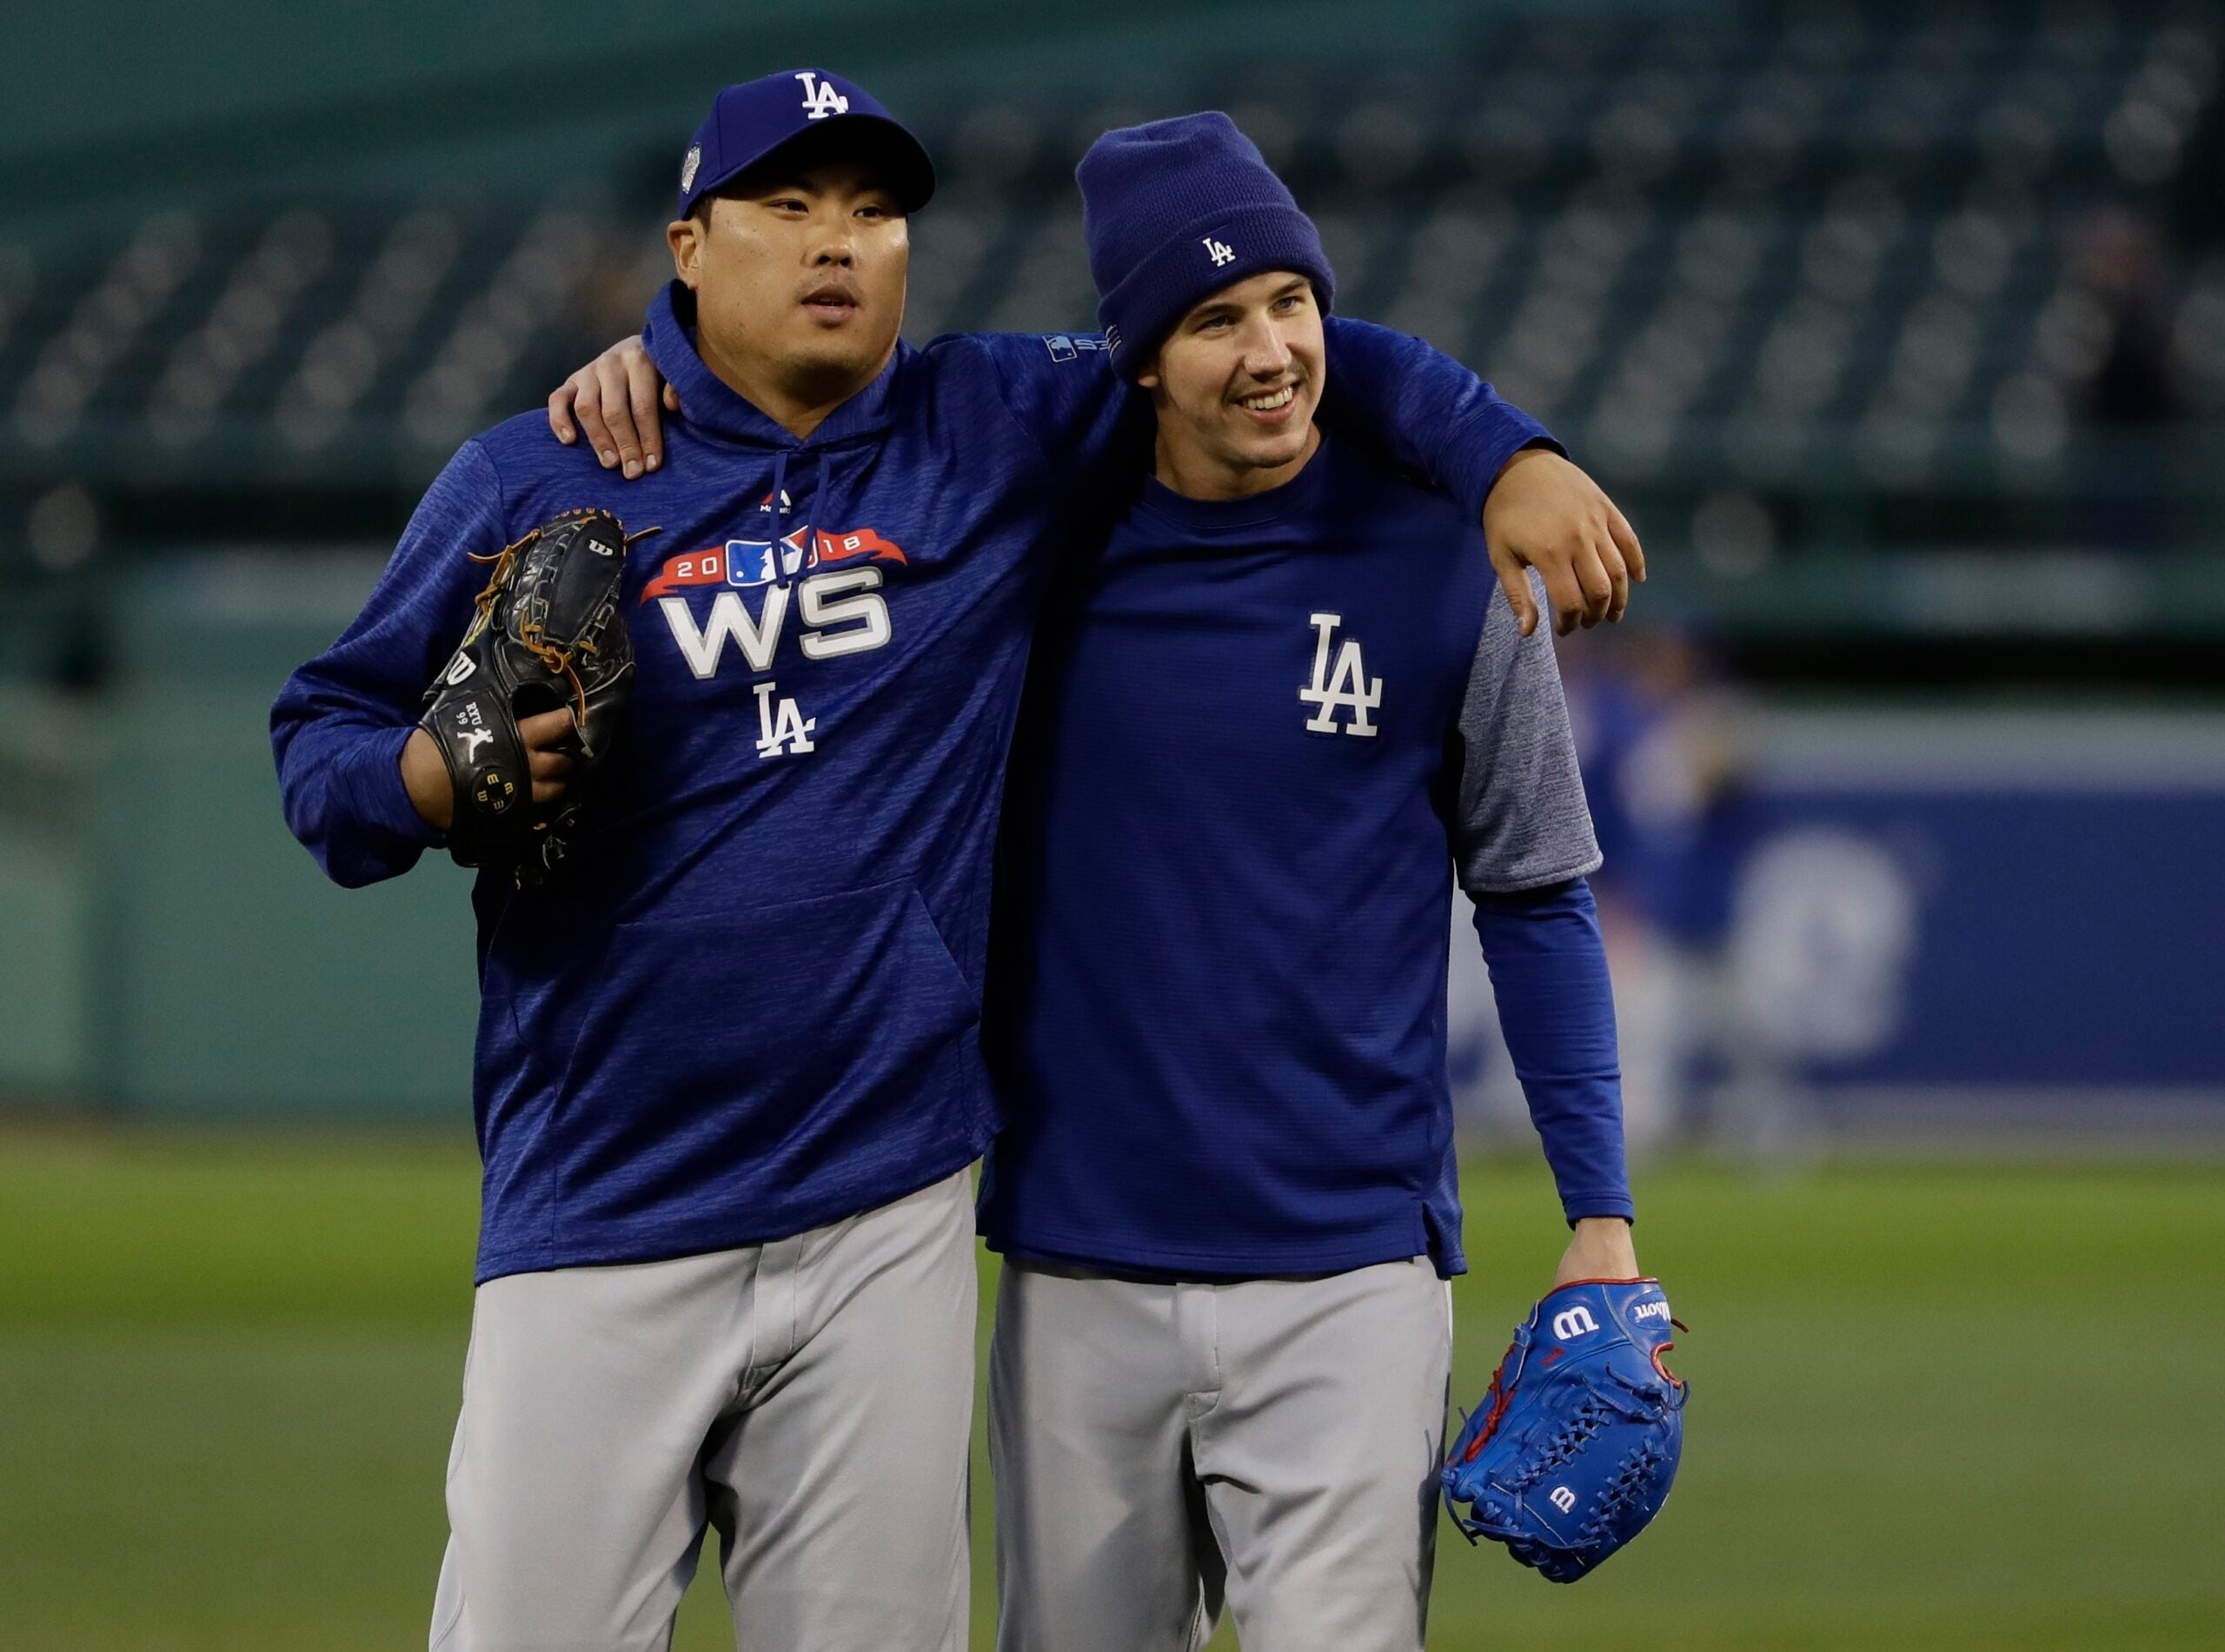 Dodgers Game 2 starter Hyun-Jin Ryu looking to exorcise road demons